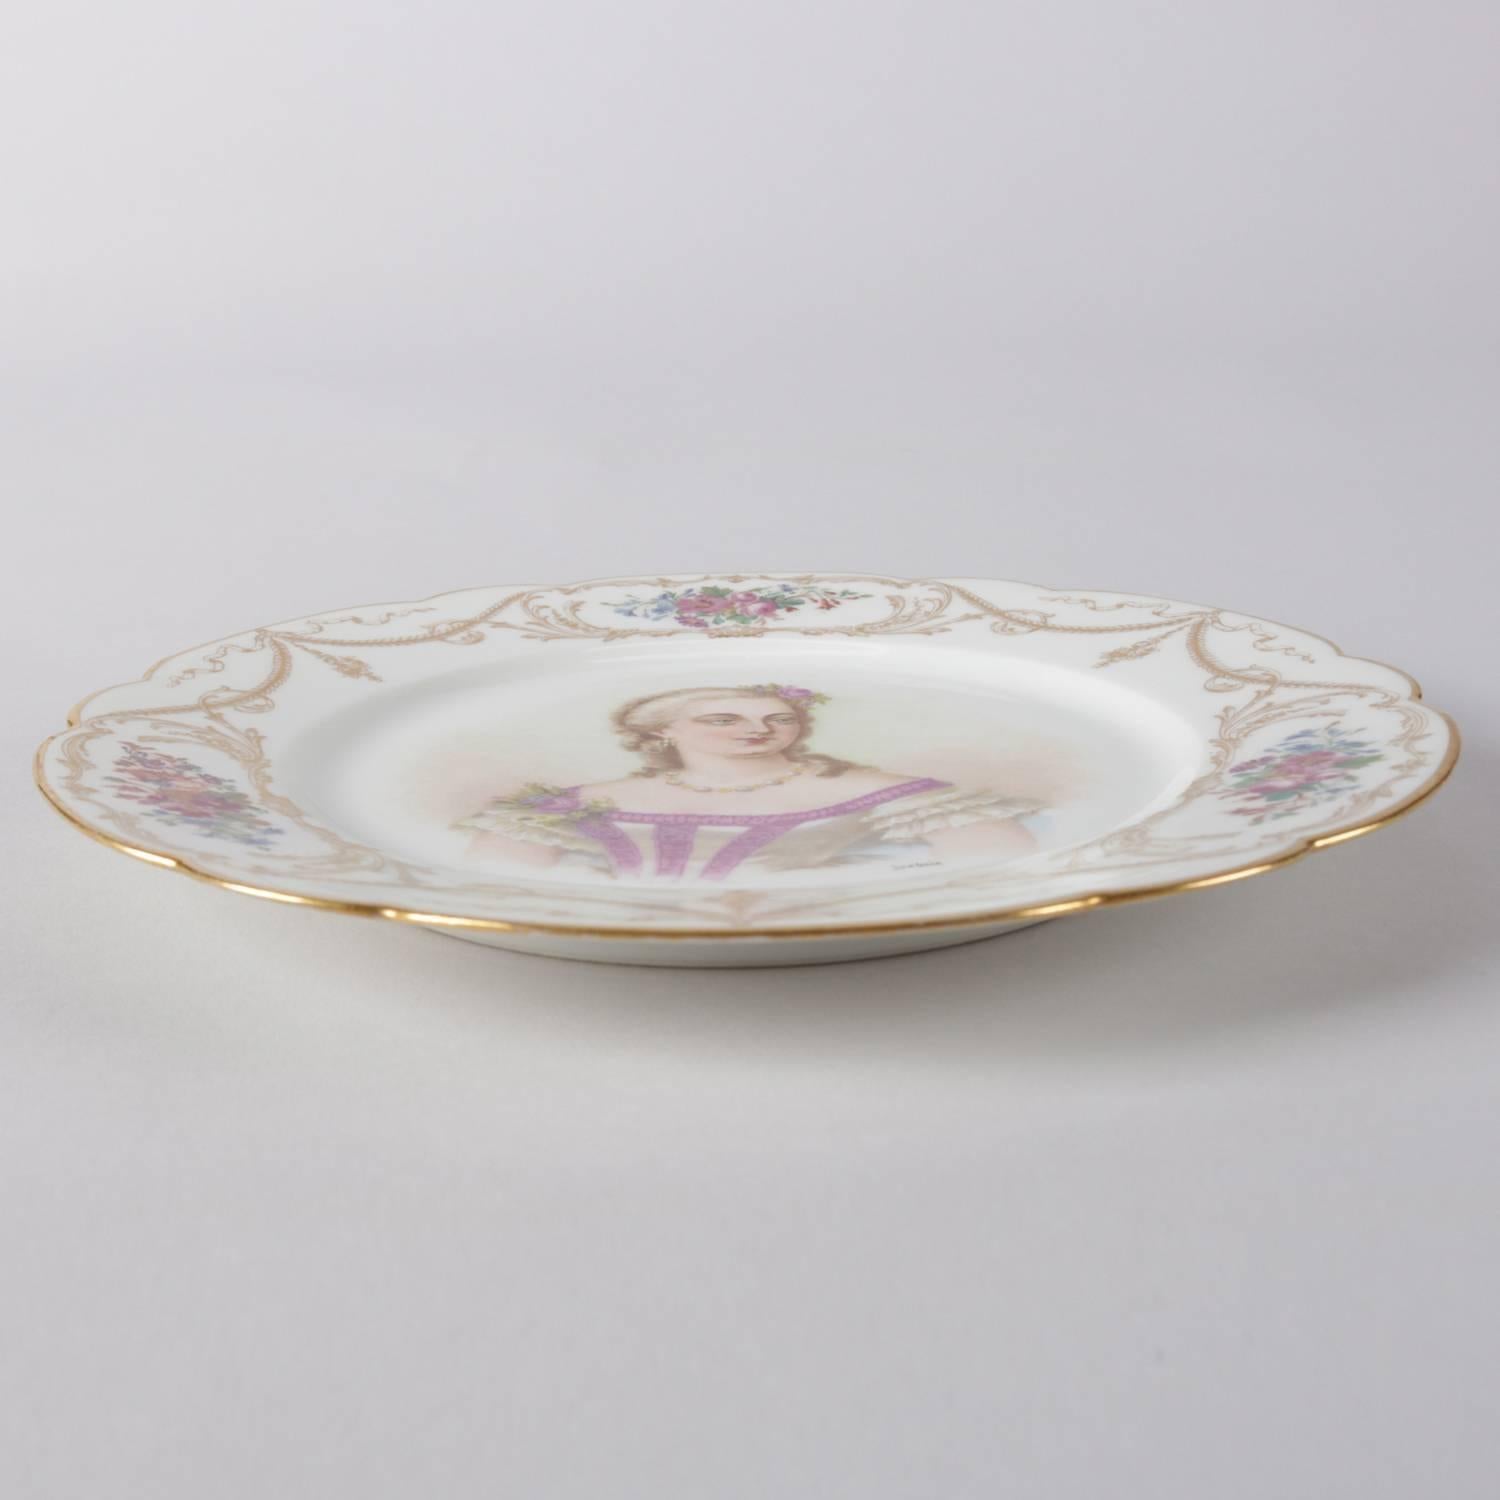 Antique French Sevres porcelain hand-painted porcelain portrait plate features central portrait signed lower right Debrise, scalloped border with floral reserves and gilt garland and scroll accents, en verso with Sevres stamp, 